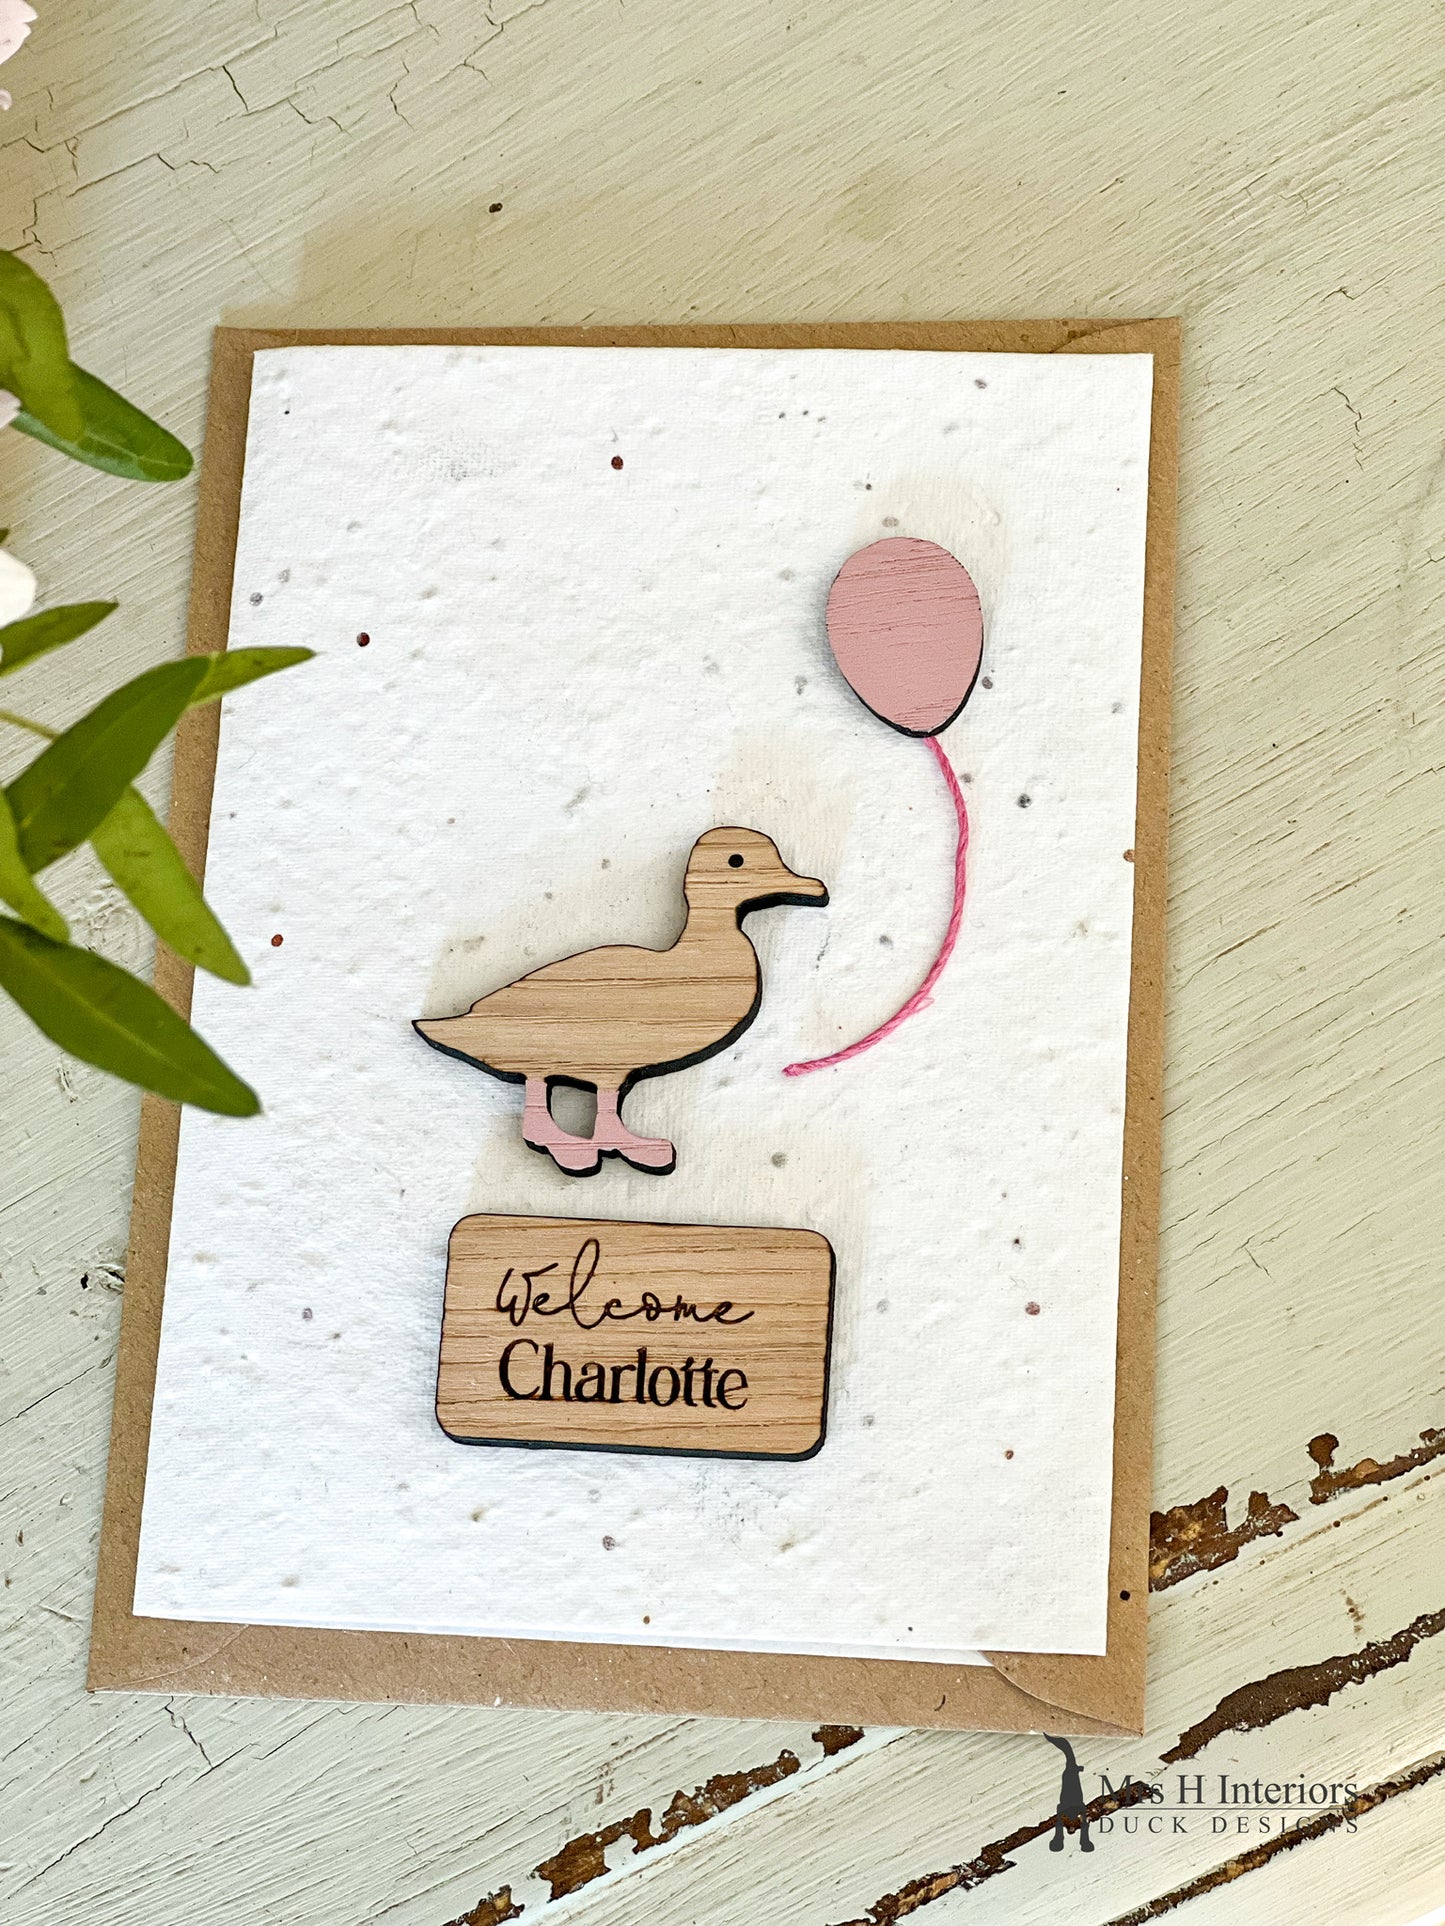 Welcome (personalised name) - Duckling & Balloon - Congratulations New Baby Card - Decorated Wooden Duck in Boots by Mrs H the Duck Lady